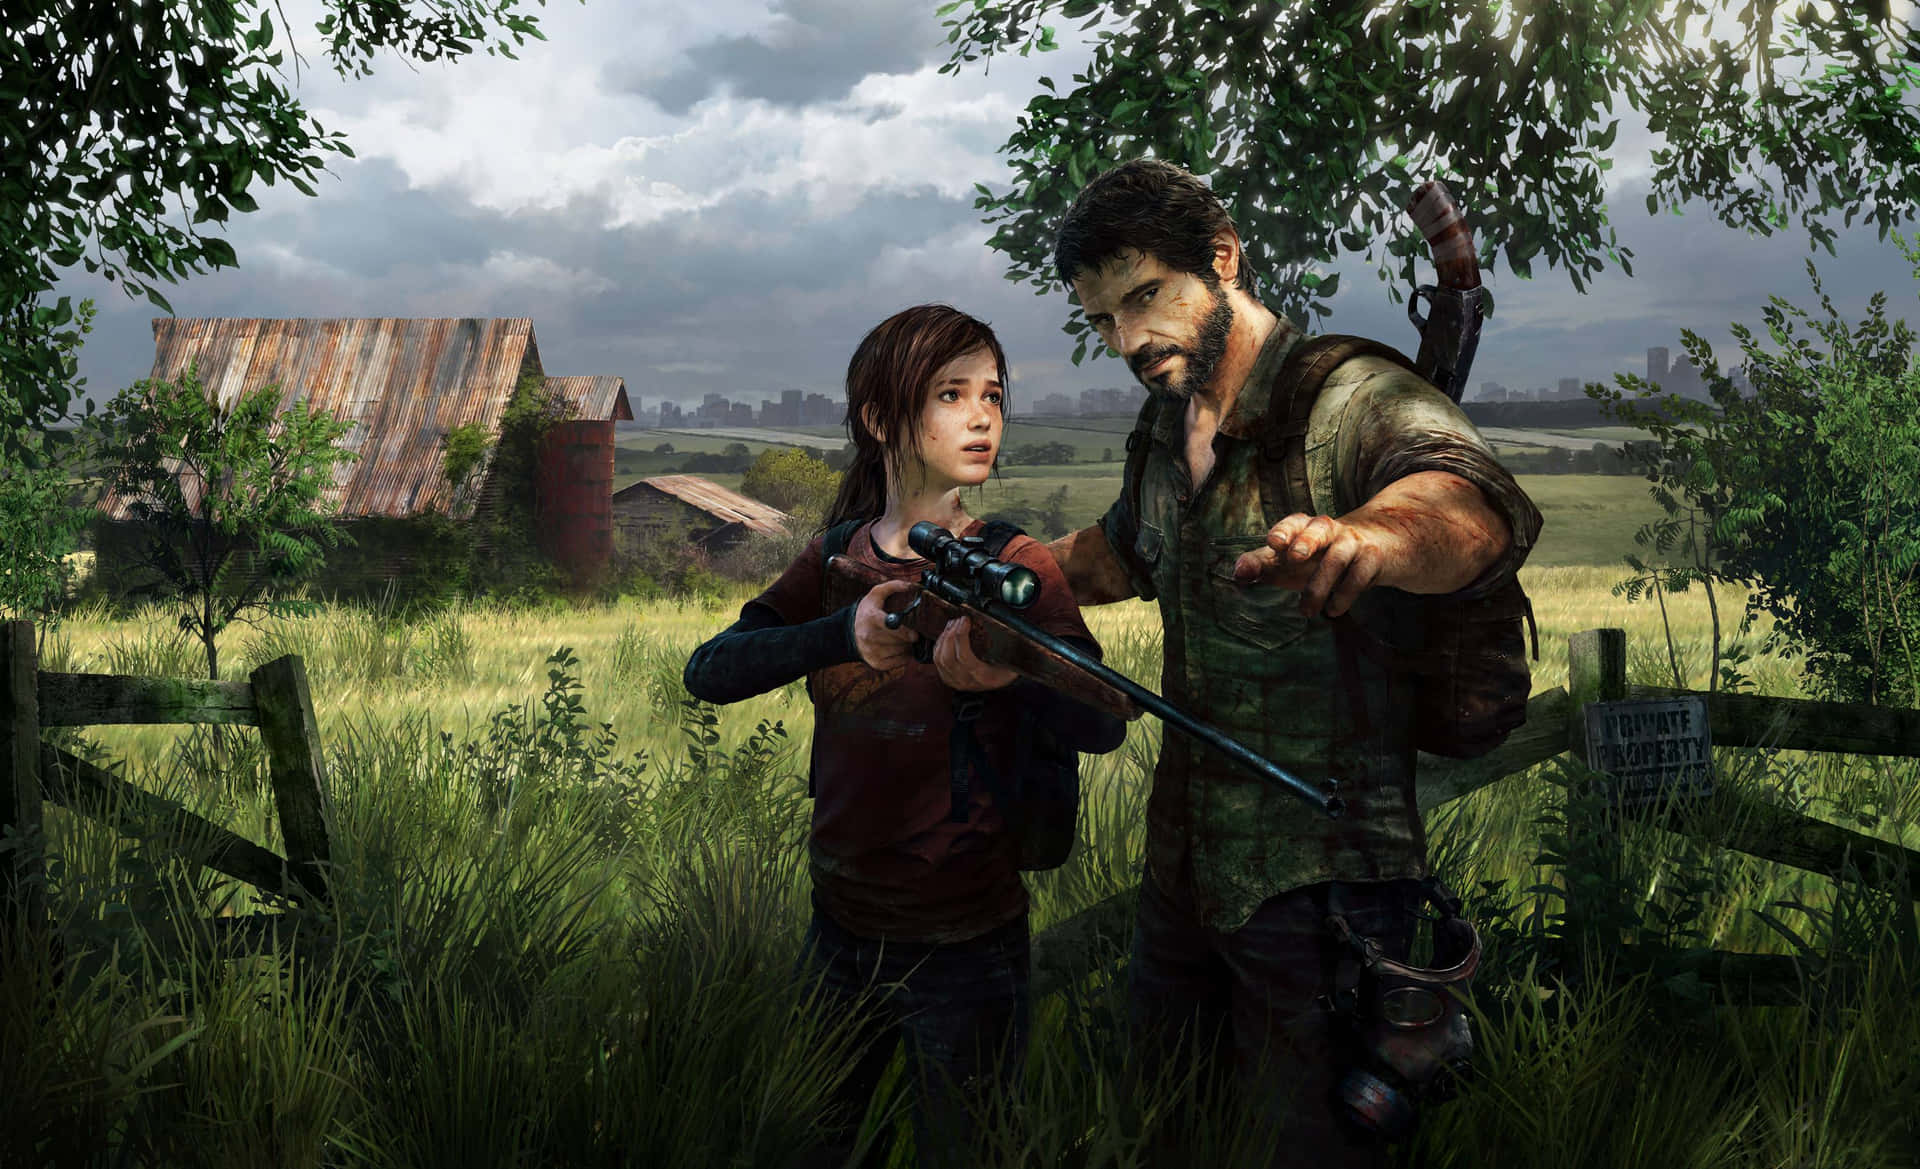 Ellie and Joel traversing the post-apocalyptic world in The Last of Us.